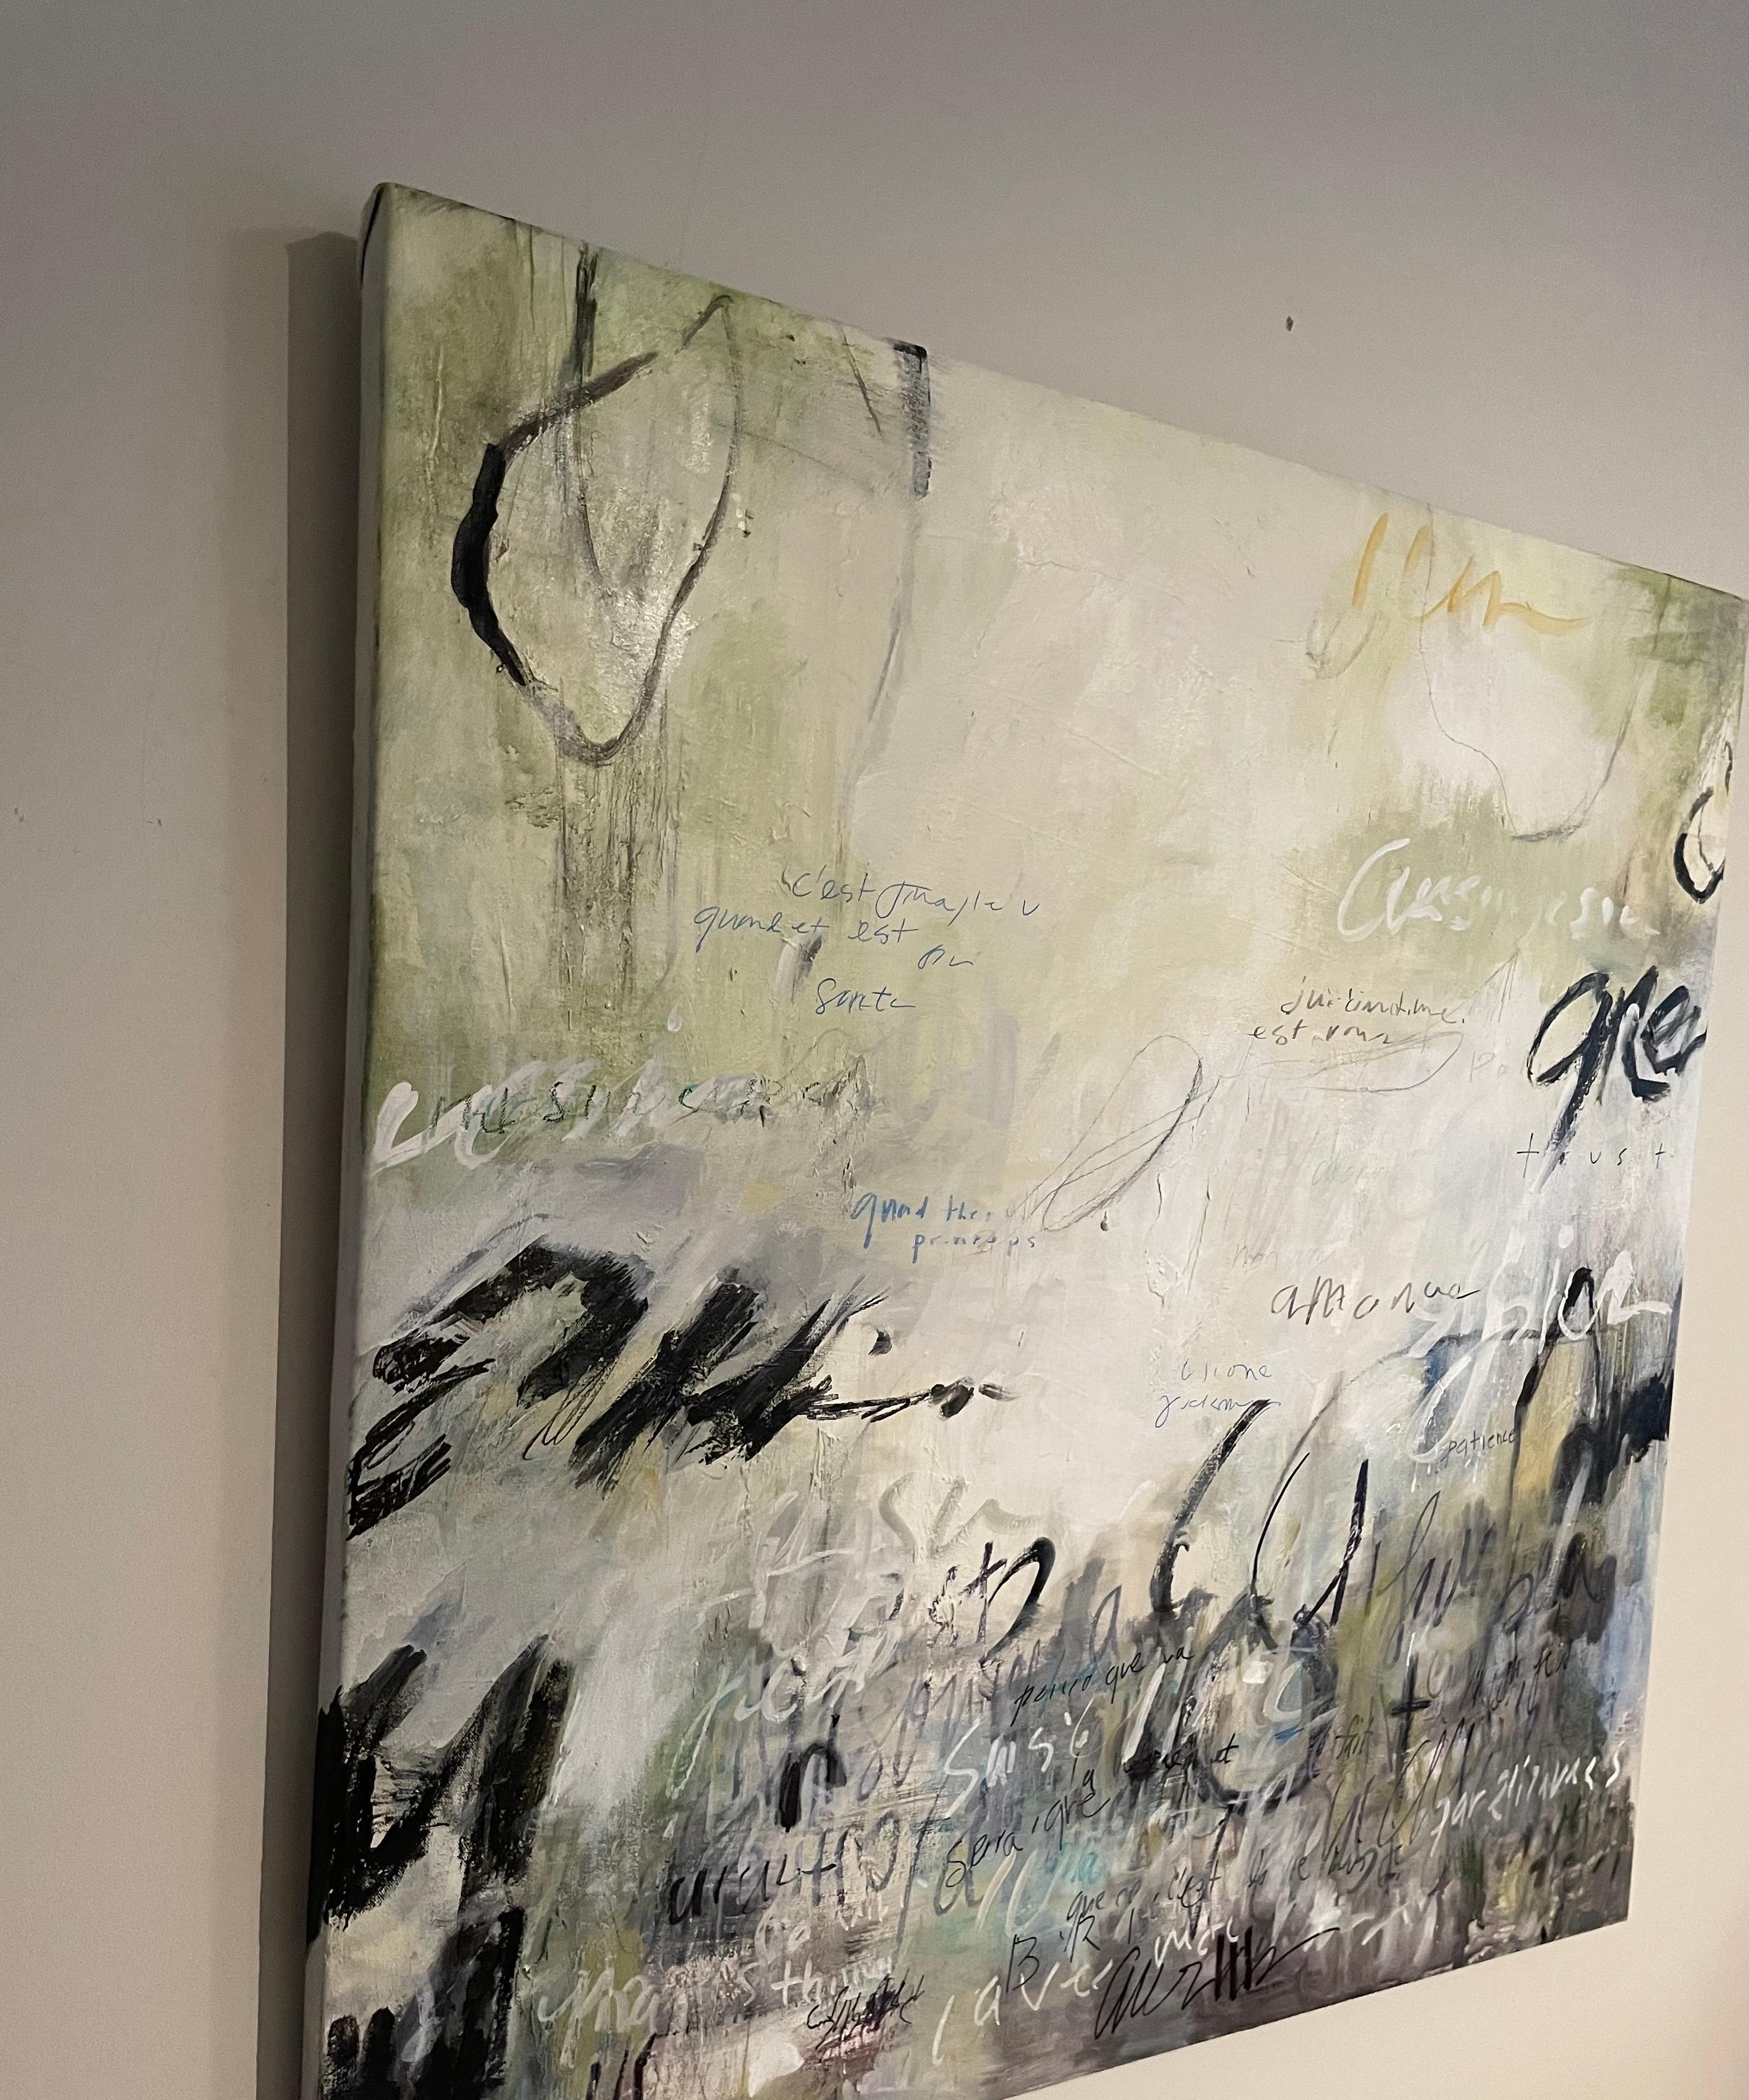 Large abstract painting in neutral colors.
This painting titled 